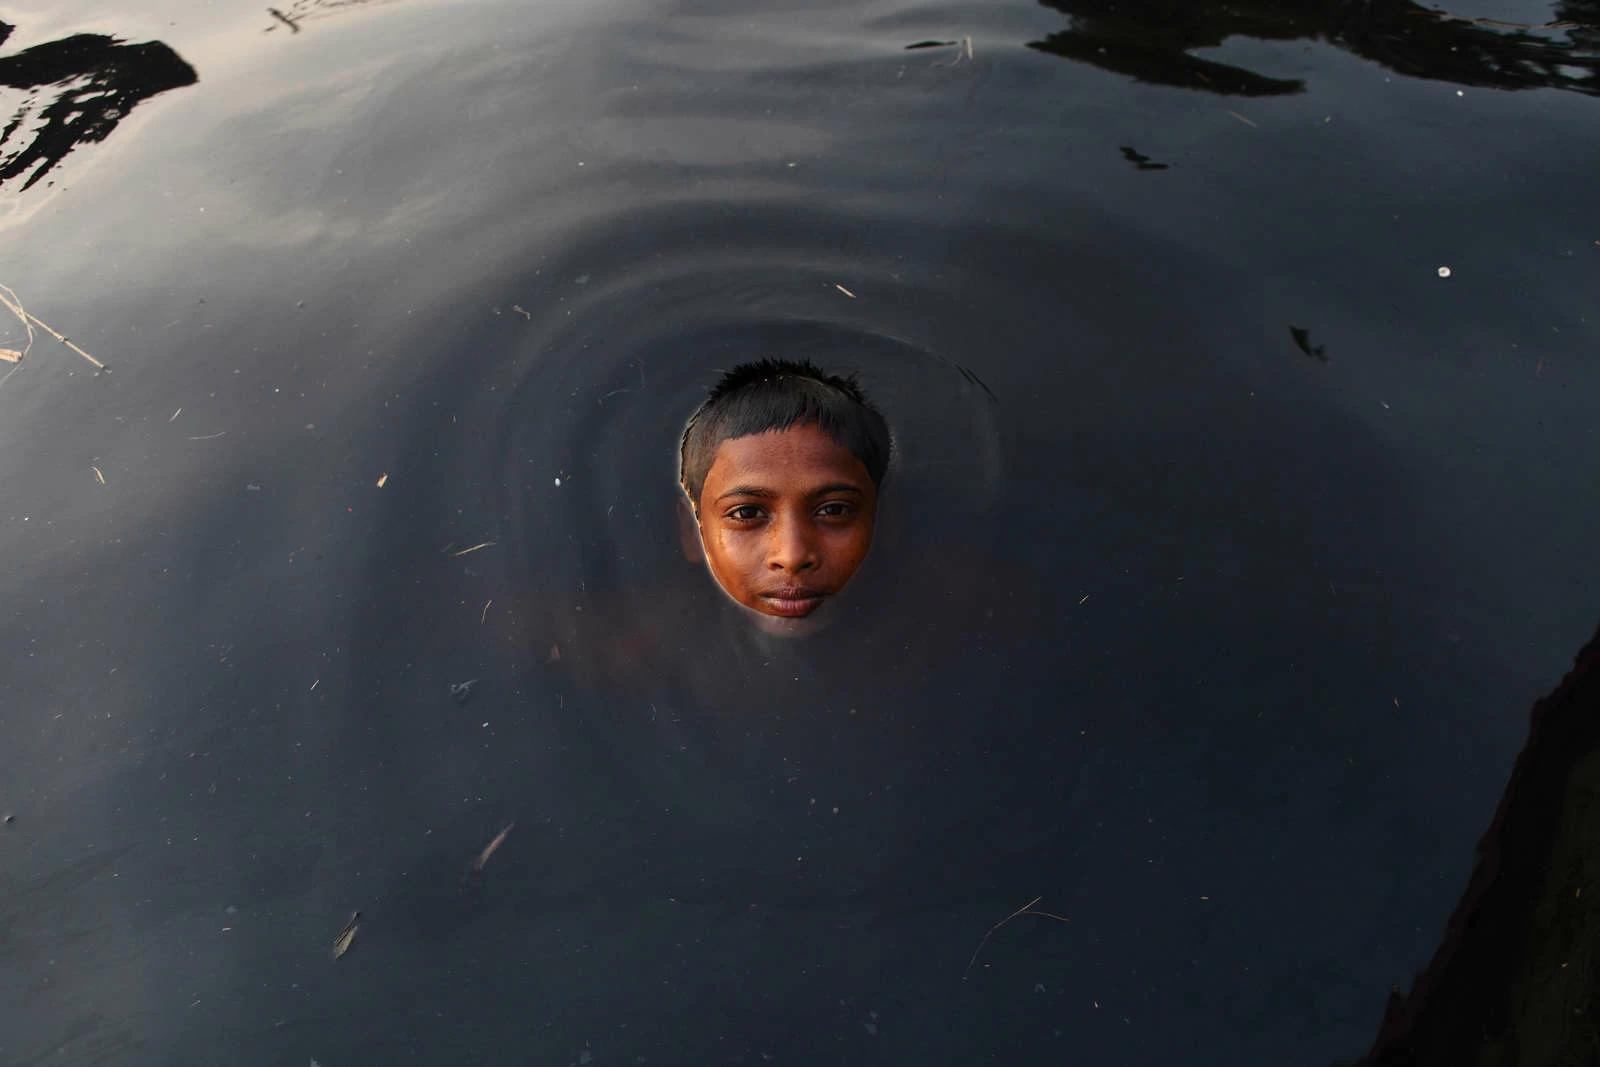 A young boy swimming in extremely polluted river water. The indiscriminate discharge of liquid waste by industries and factories in and around the Dhaka industrial zone has ruined a large part of the Buriganga river, causing immense suffering to residents living on the banks. Photo and story by Probal Rashid.